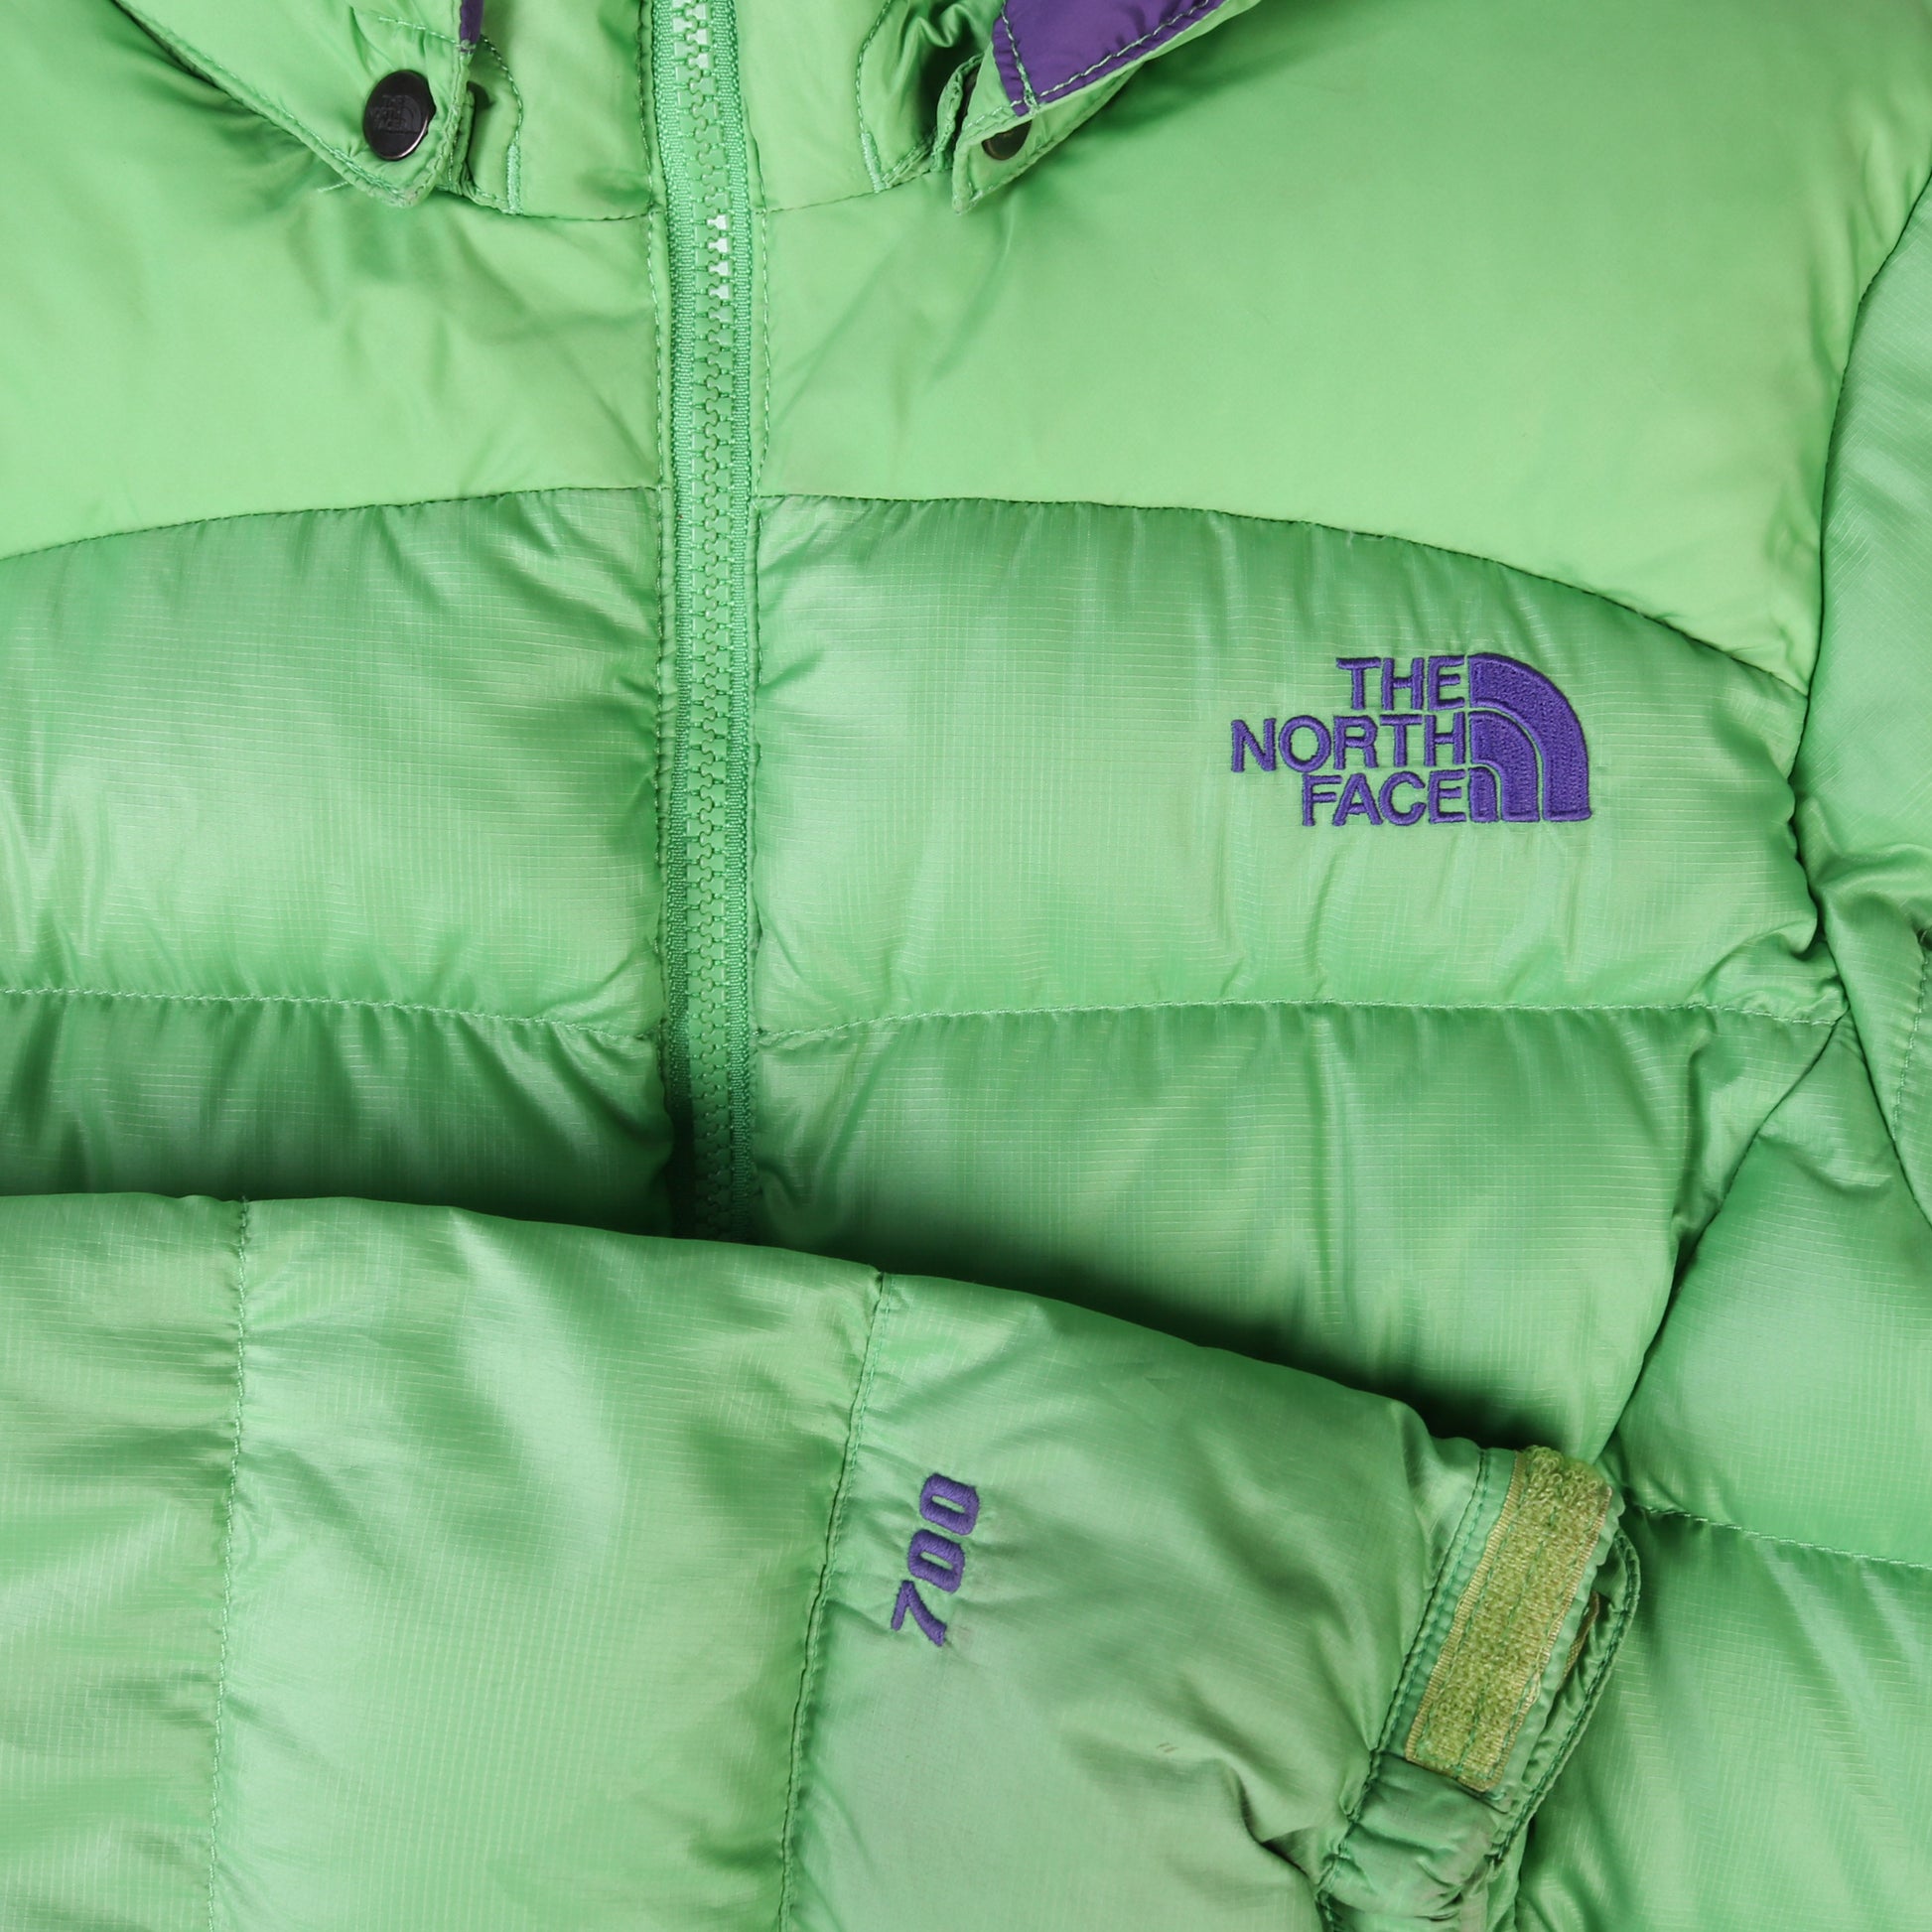 700 Down Puffer Jacket - American Madness